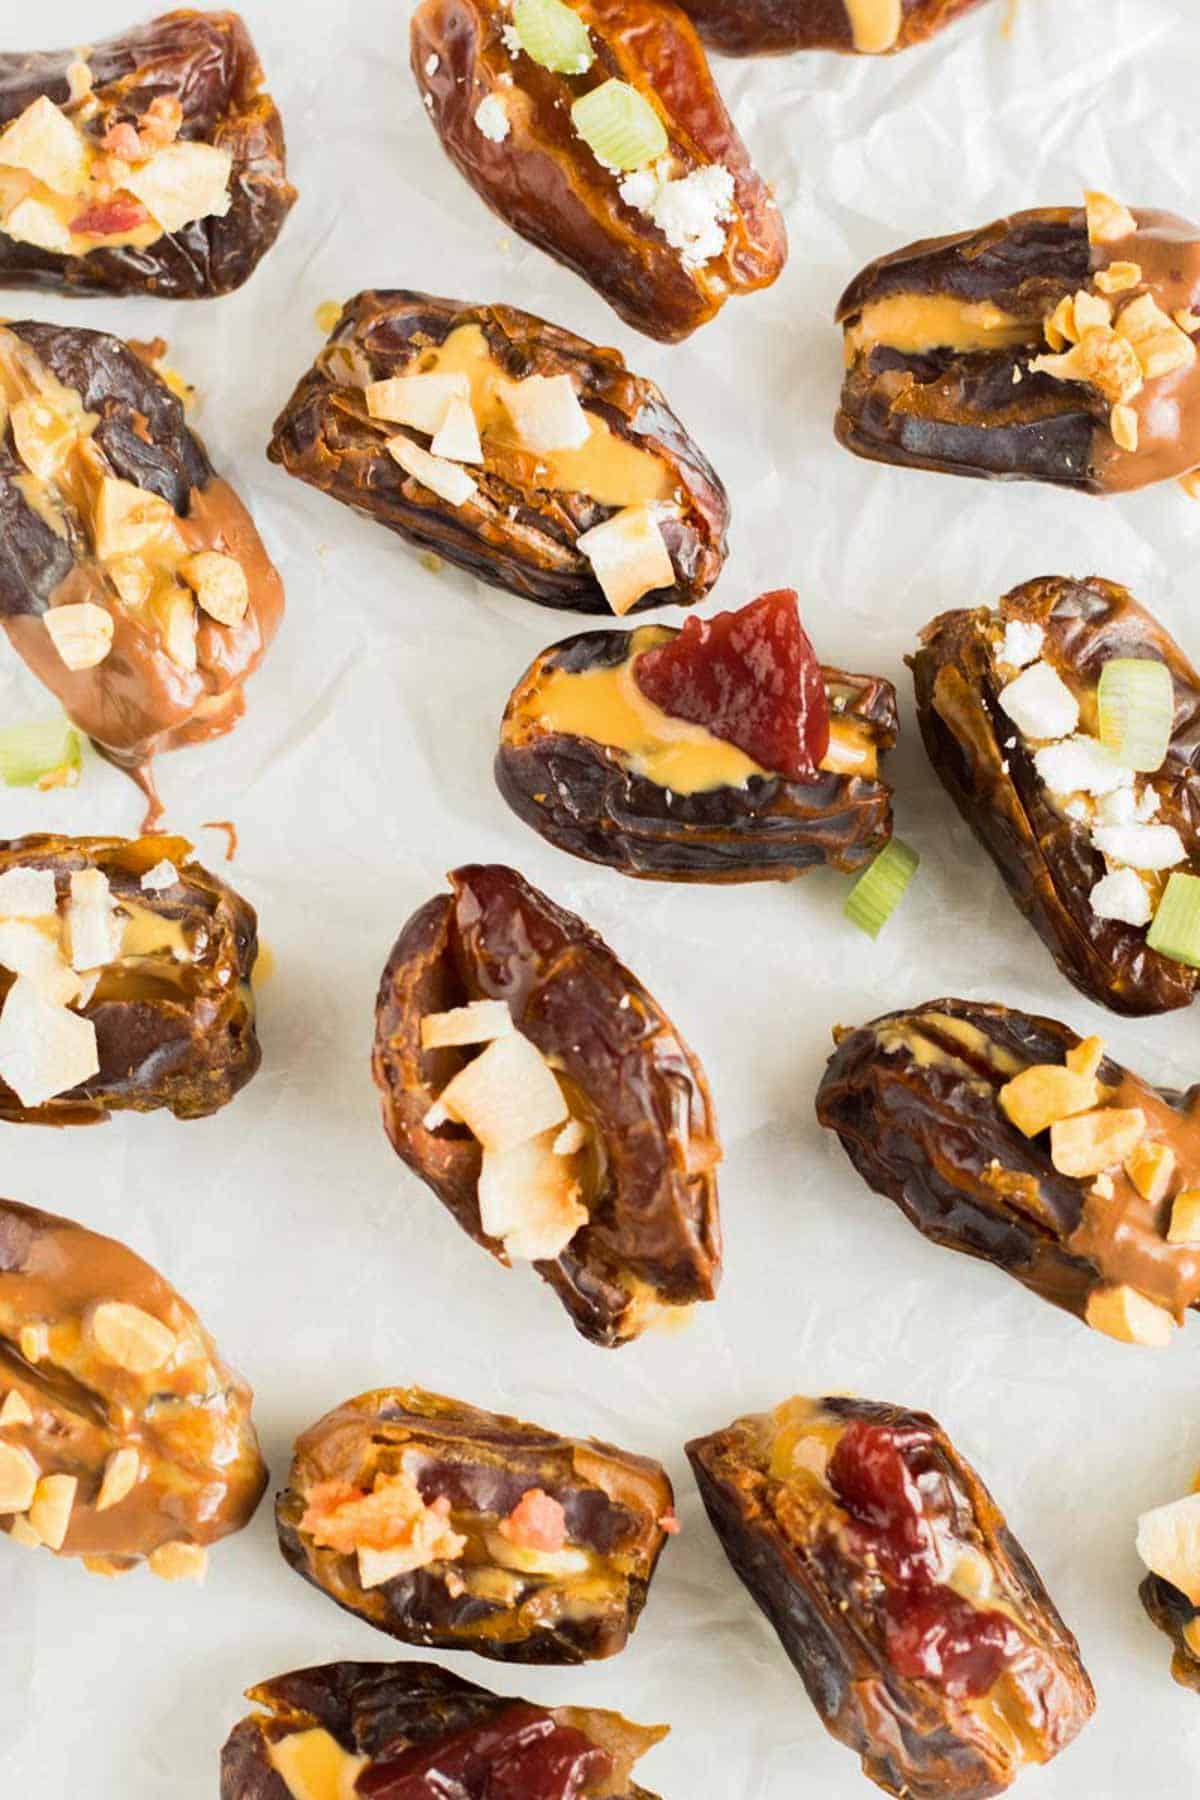 different variations of stuffed dates on white surface with jelly, nuts, peanut butter, goat cheese, coconut